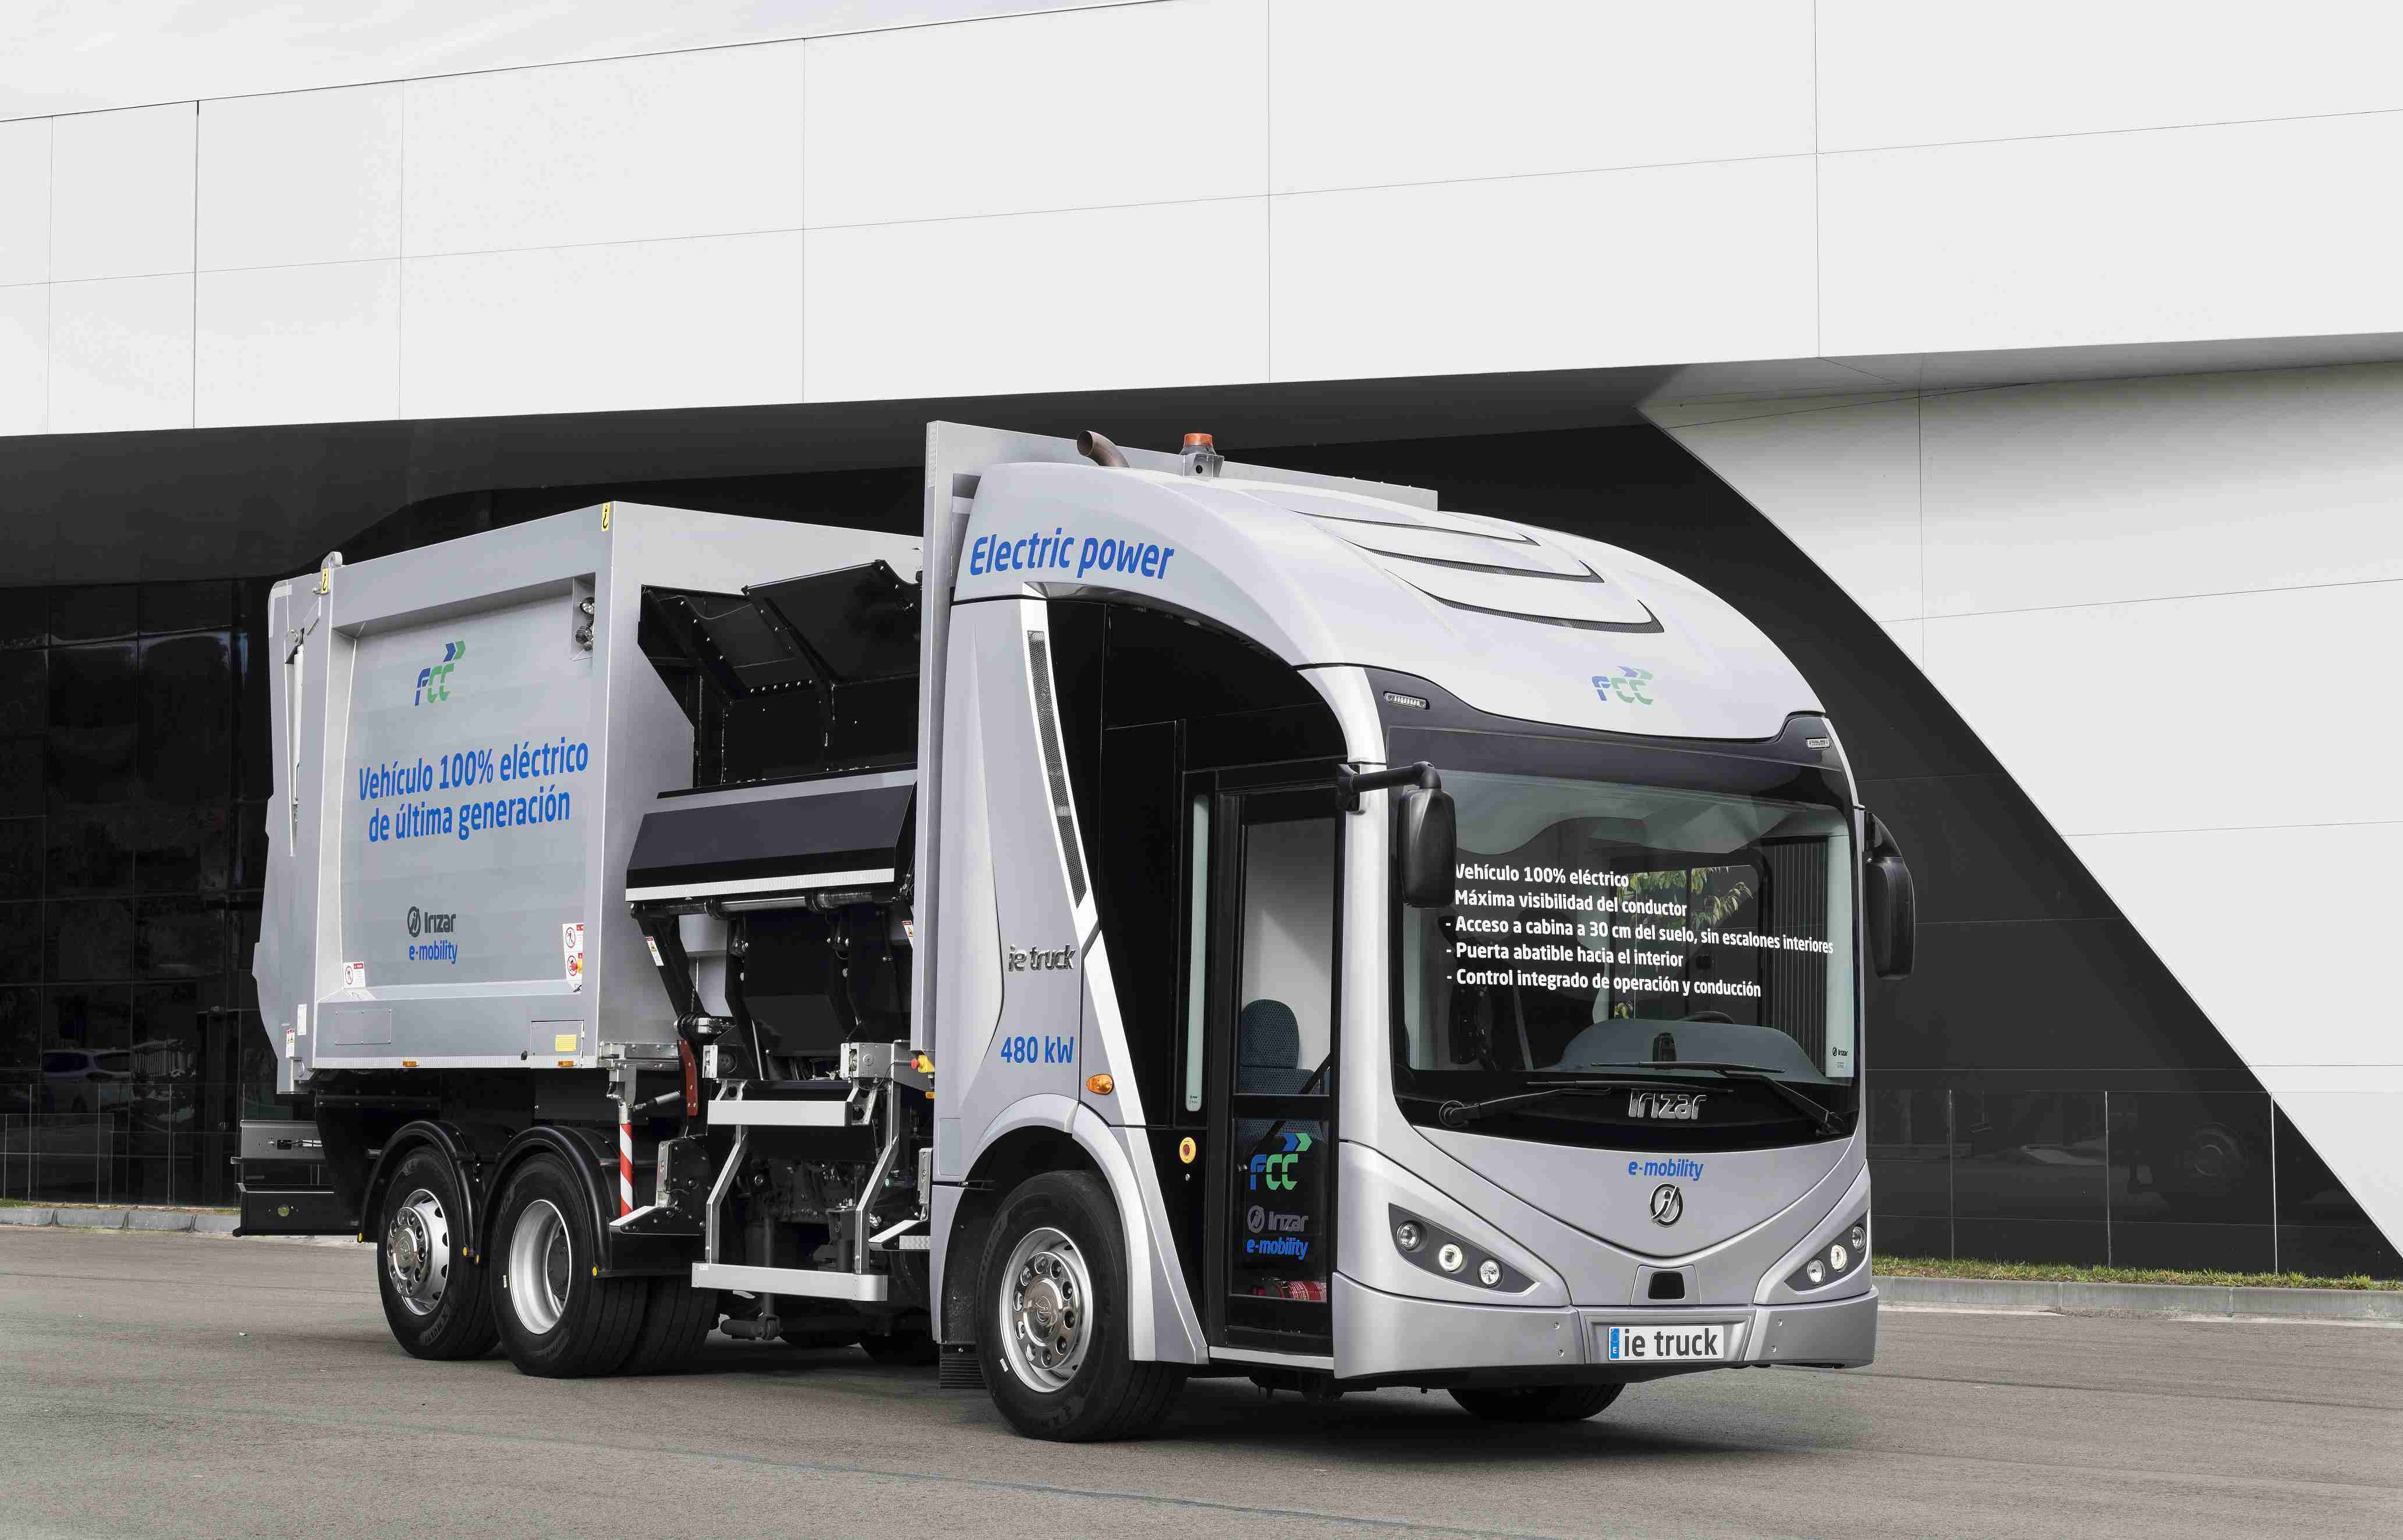 Side-loading electric collection vehicle developed on the FCC e-mobility platform